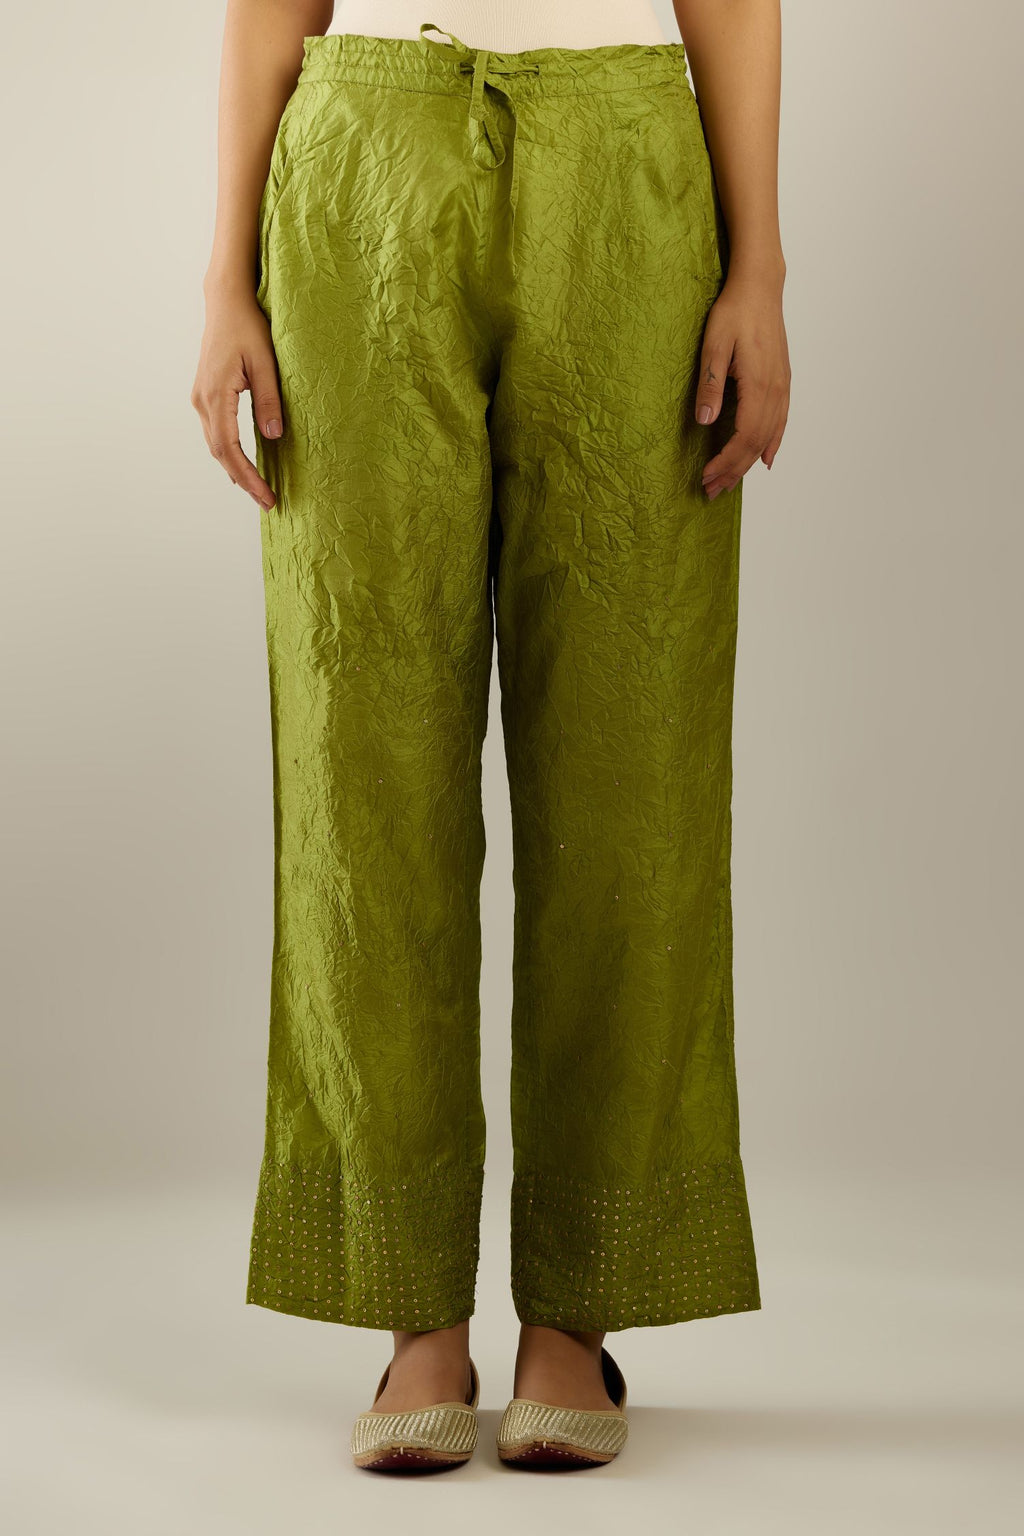 Apple green hand crushed silk straight pants detailed with gold sequins at hem and a single sequin buti is sprayed all over the pants and side pockets